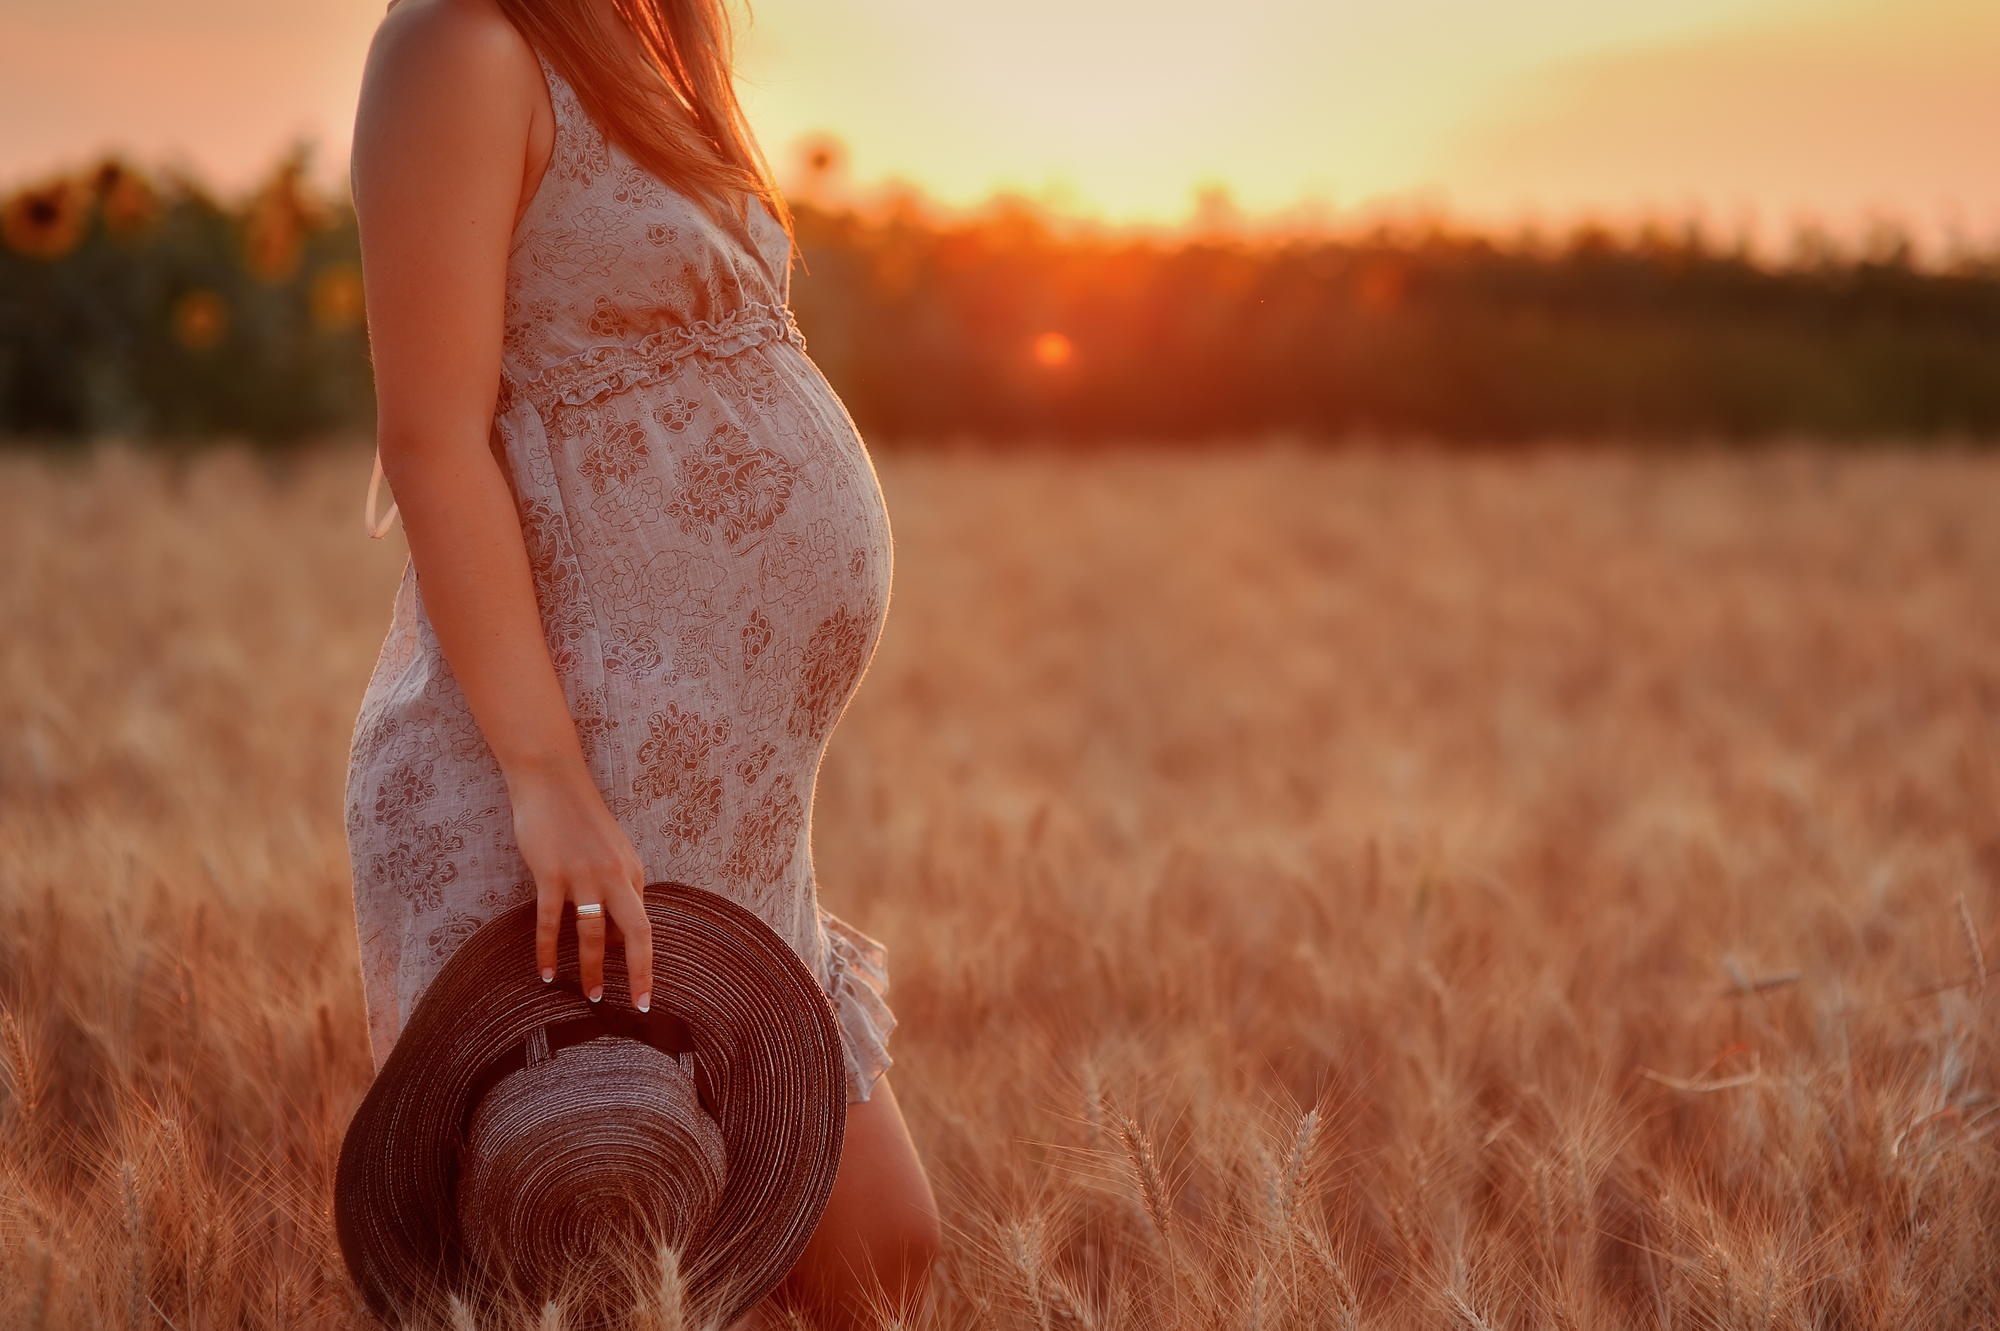 The pregnant girl with a hat in the field of wheat on a sunset. Concept image for percoset and pregnancy.